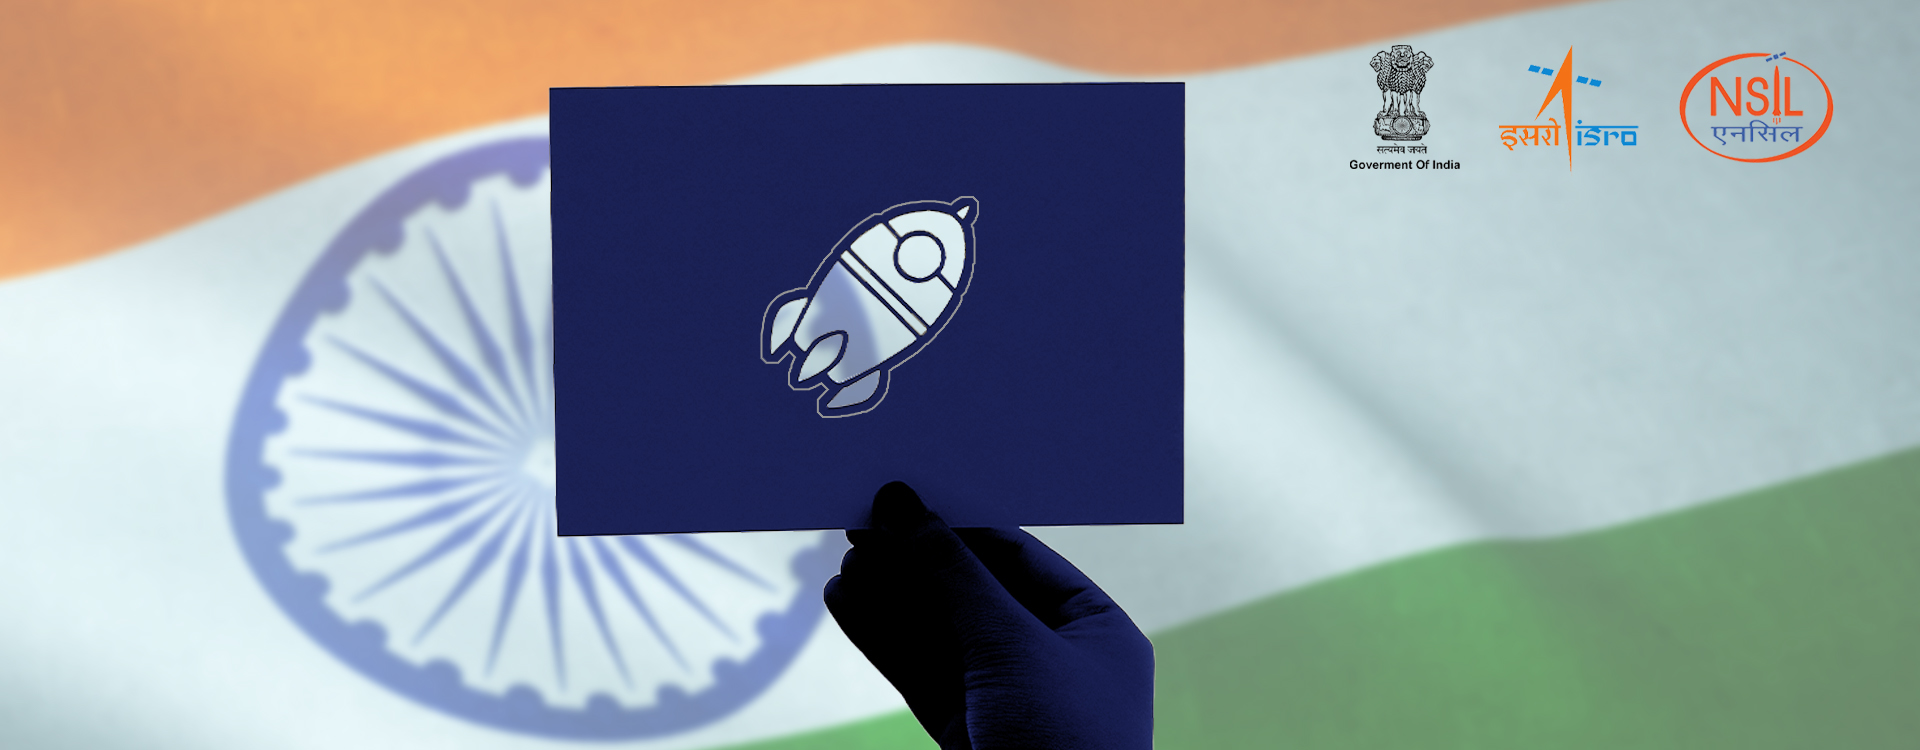 Indian space start-ups ISRO Space Race India